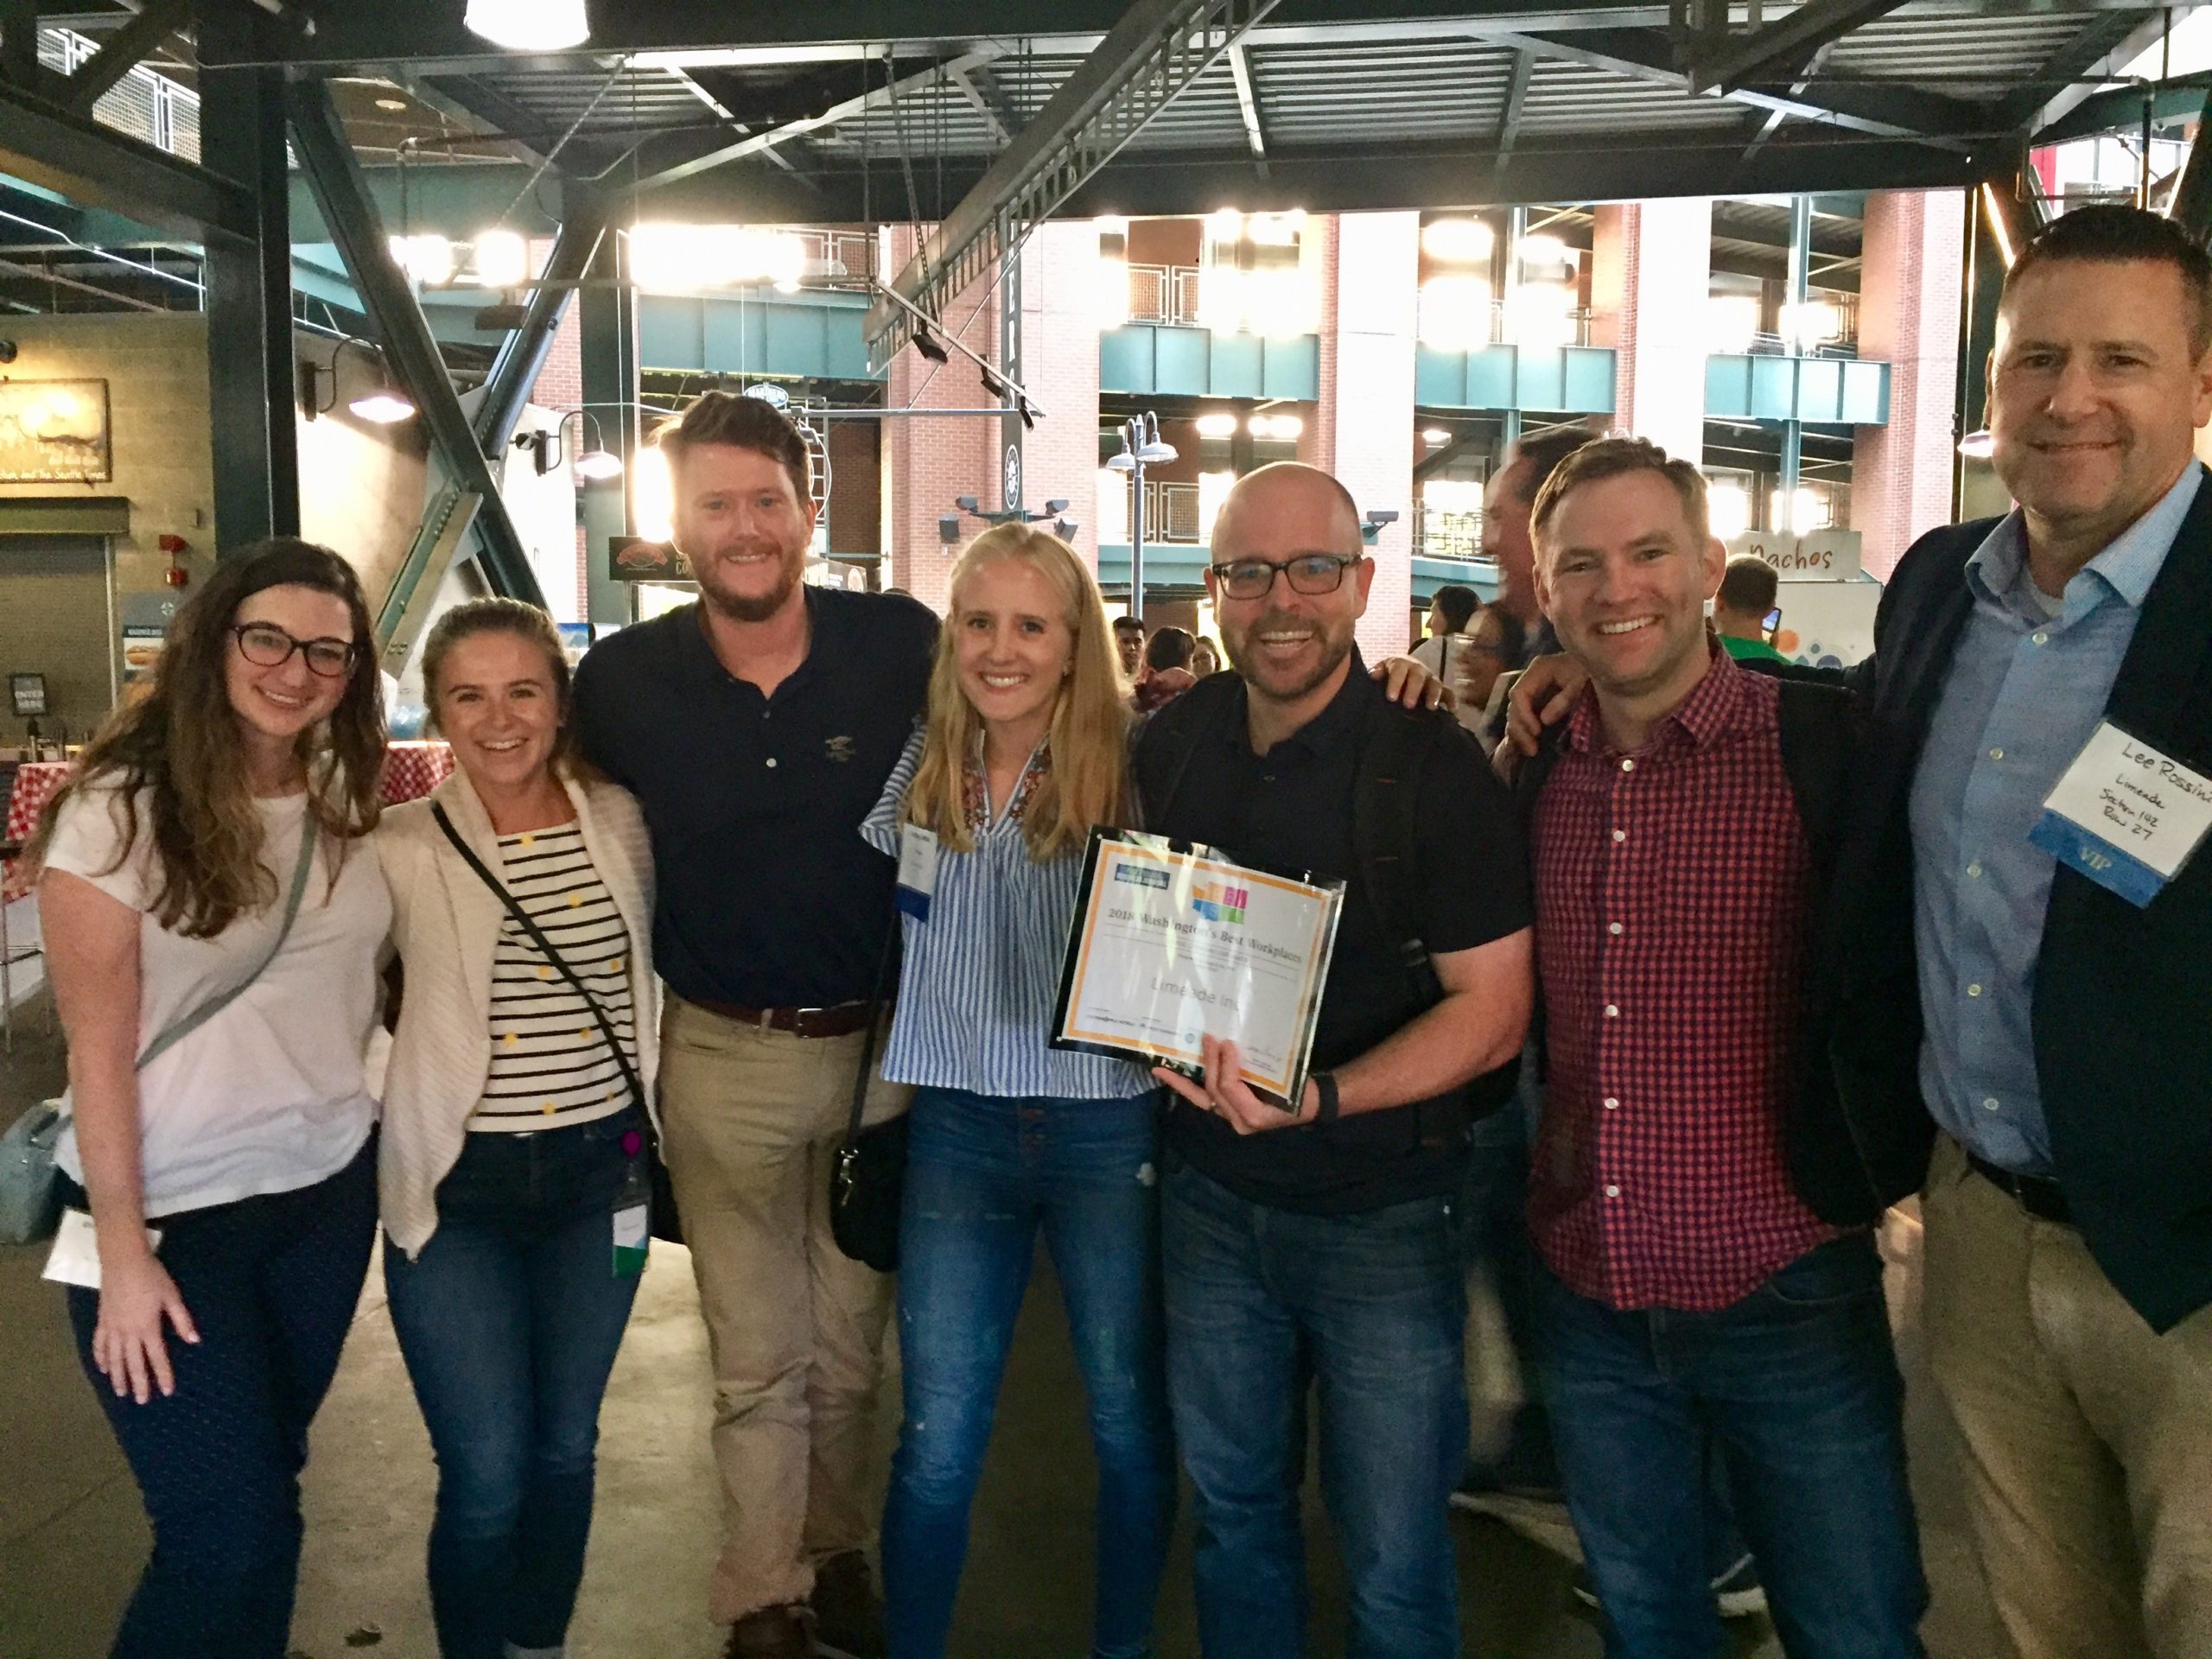 Limeade PSBJ 2018 1024x768 - Limeade Recognized as a 5-time finalist for Washington's Best Workplaces by Puget Sound Business Journal